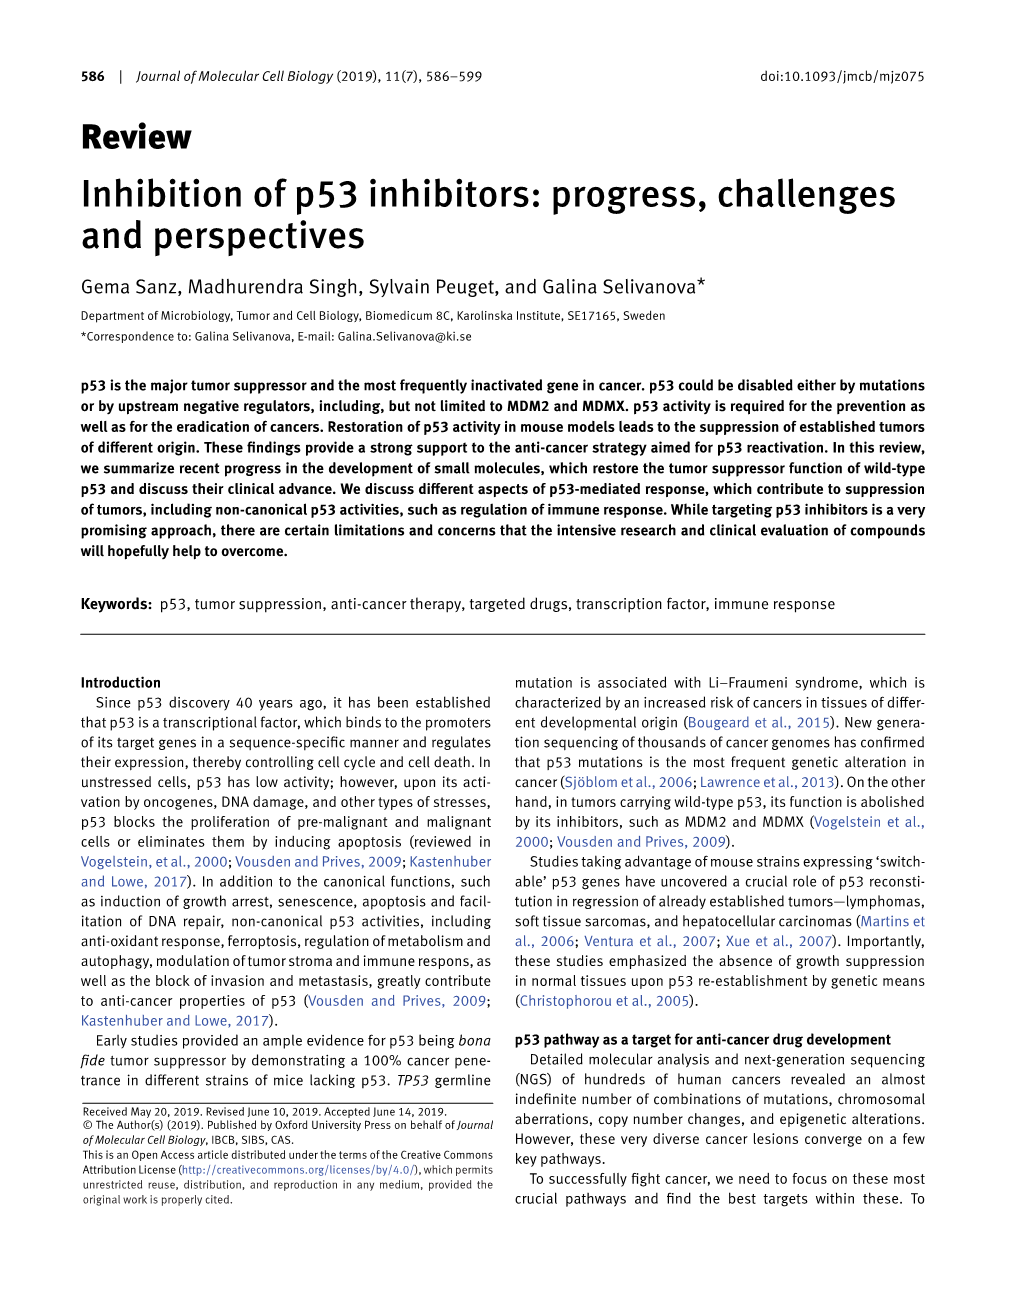 Inhibition of P53 Inhibitors: Progress, Challenges and Perspectives